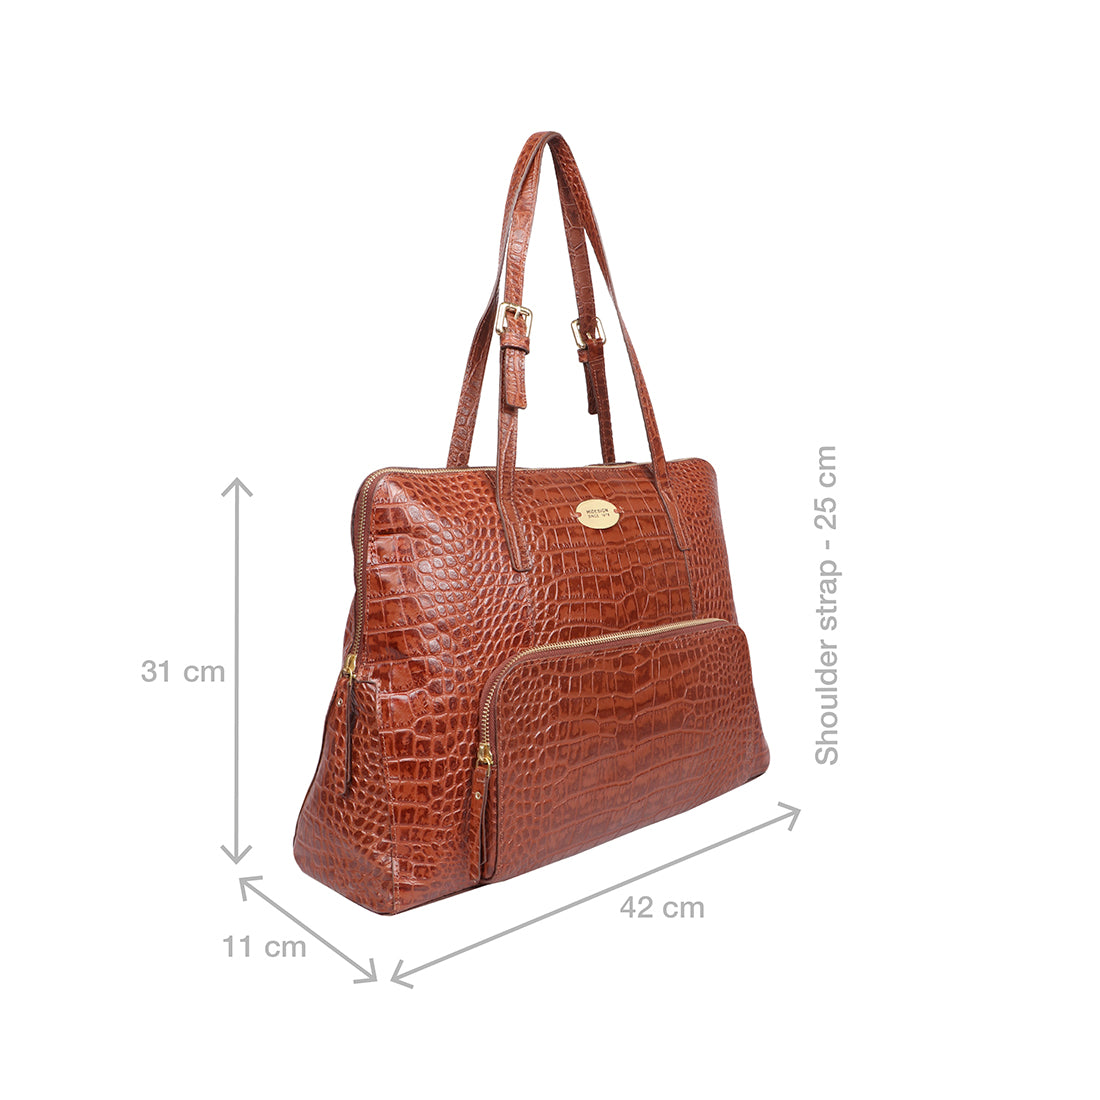 Aalia Bags in Mani Majra,Chandigarh - Best Bag Manufacturers in Chandigarh  - Justdial